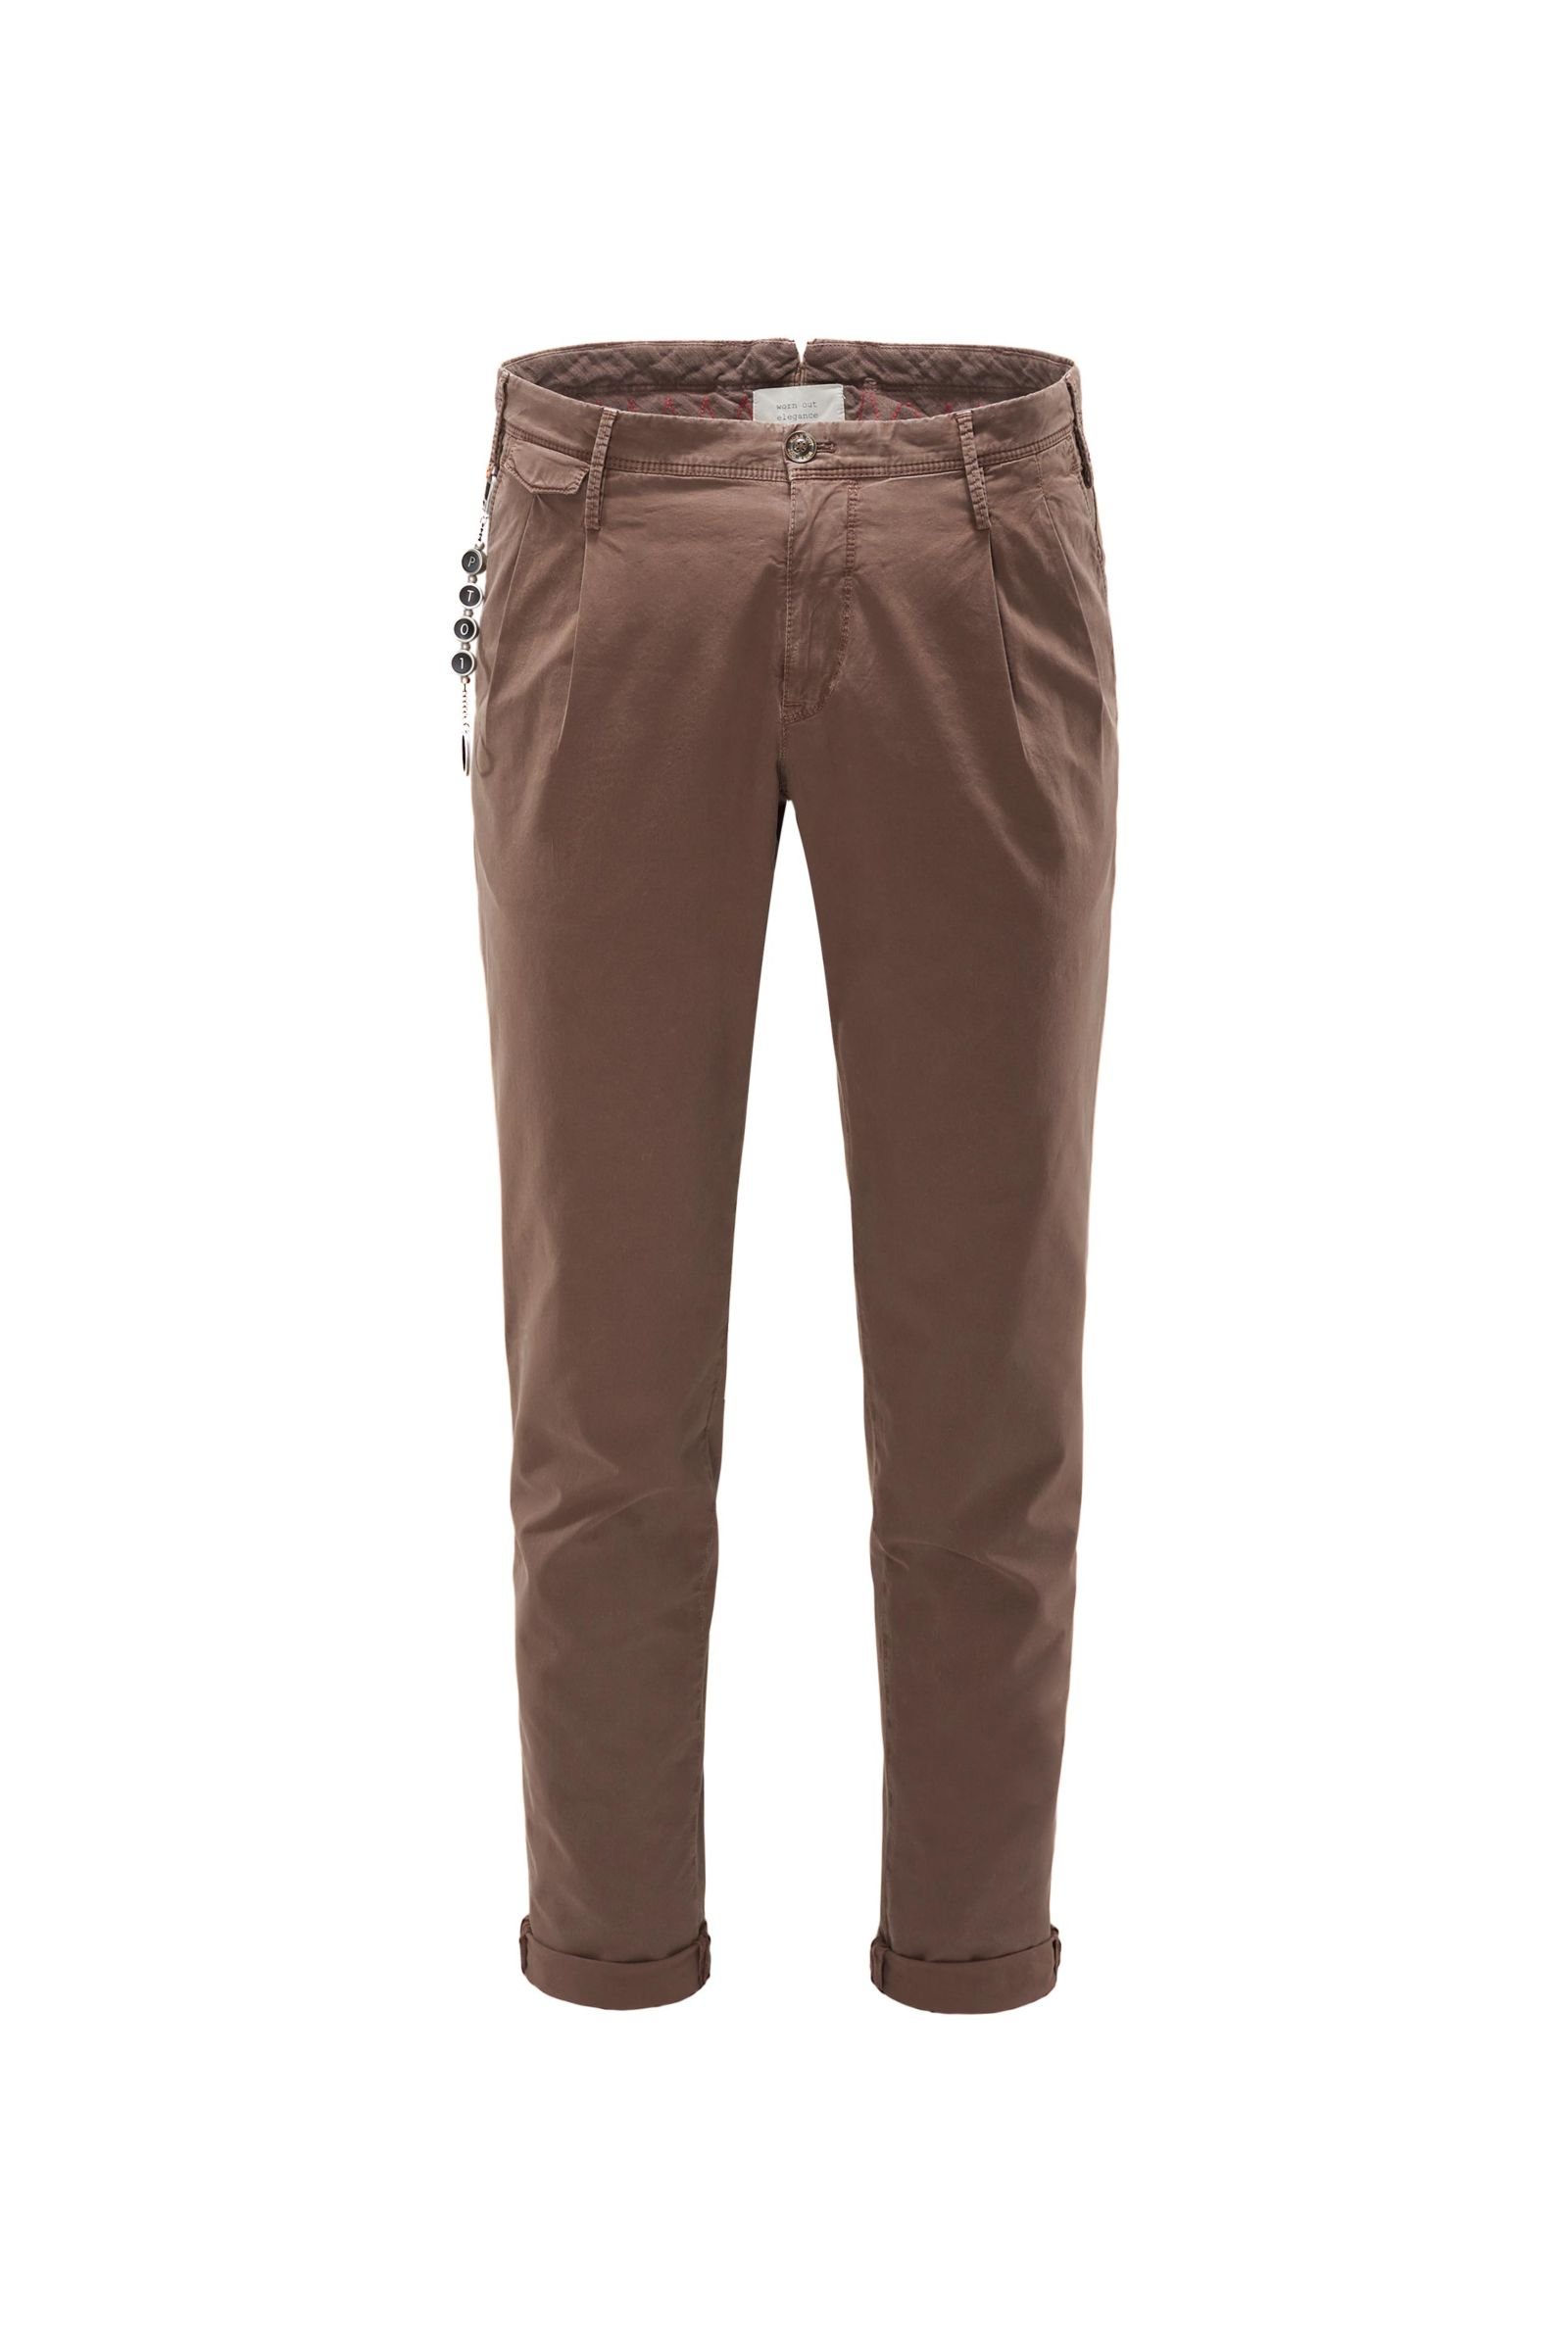 Cotton trousers 'Worn out Elegance' brown